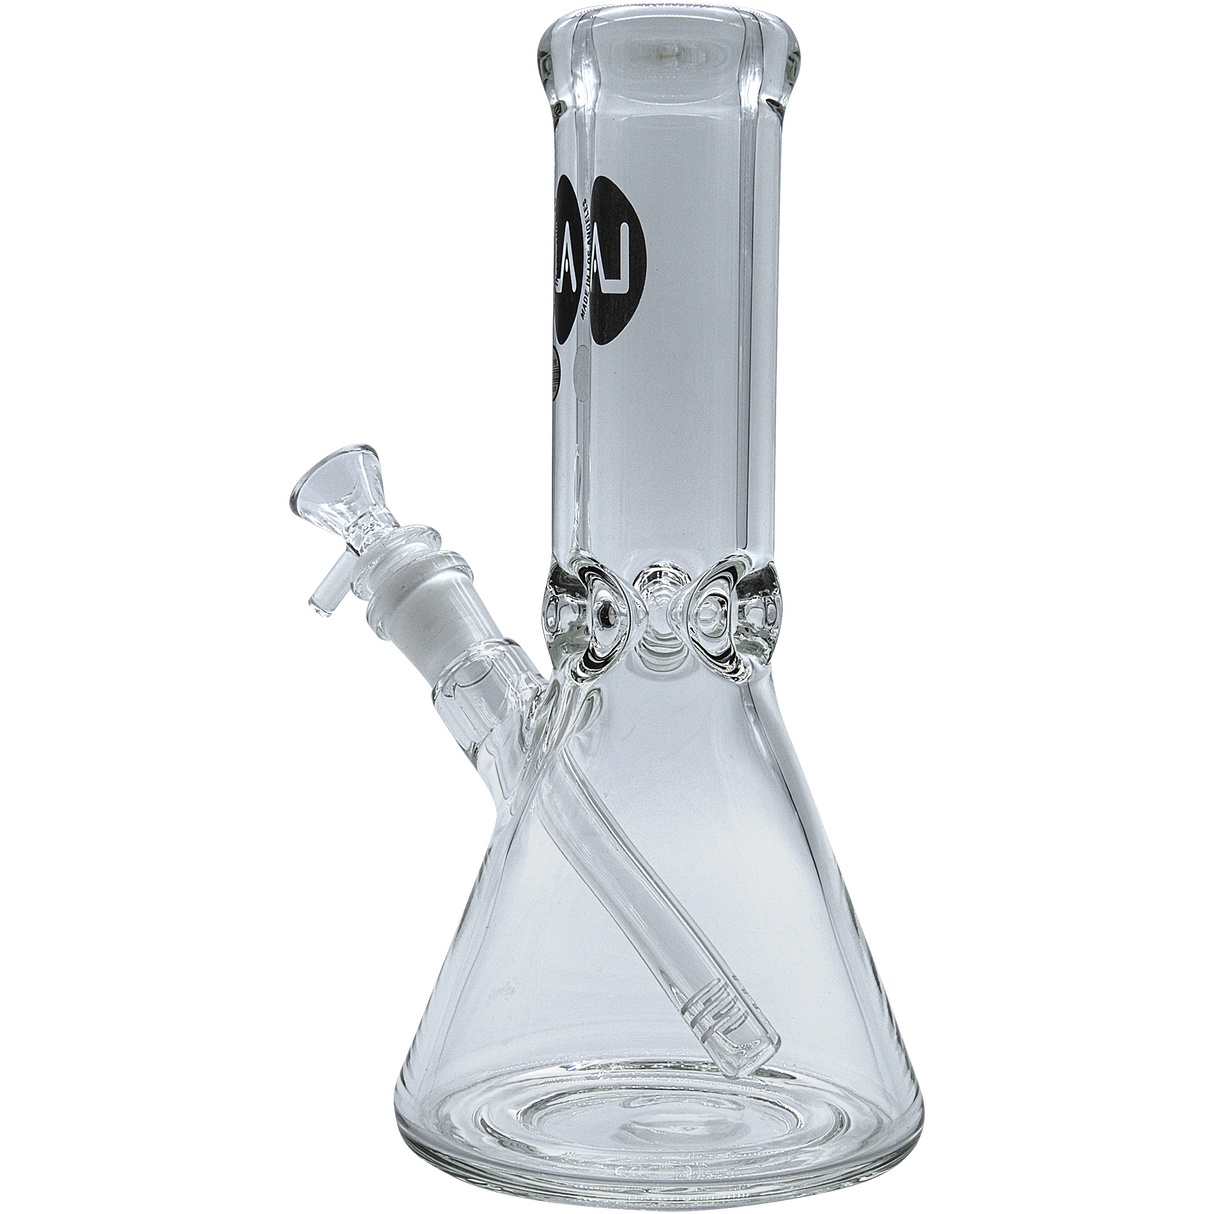 LA Pipes "Agent Stout" 9mm Thick Beaker Bong, Front View with Clear Borosilicate Glass